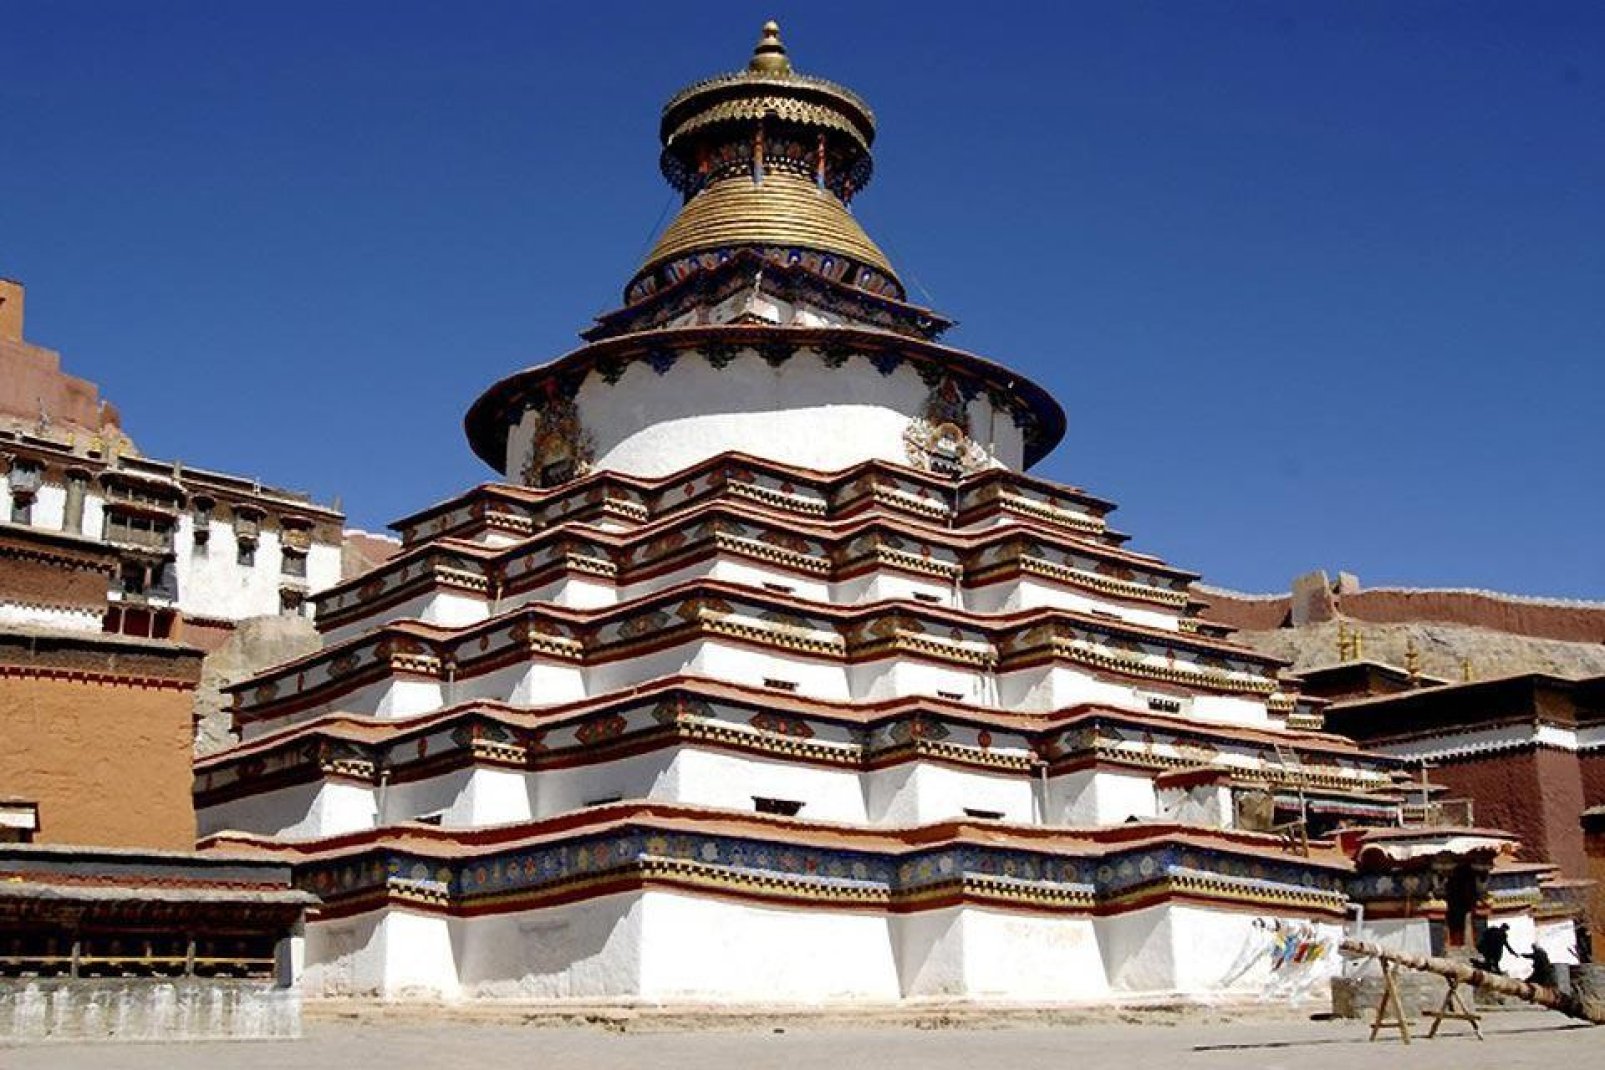 The city's main attraction is the Palkhor Chode Monastery, which dates back to the year 1418.